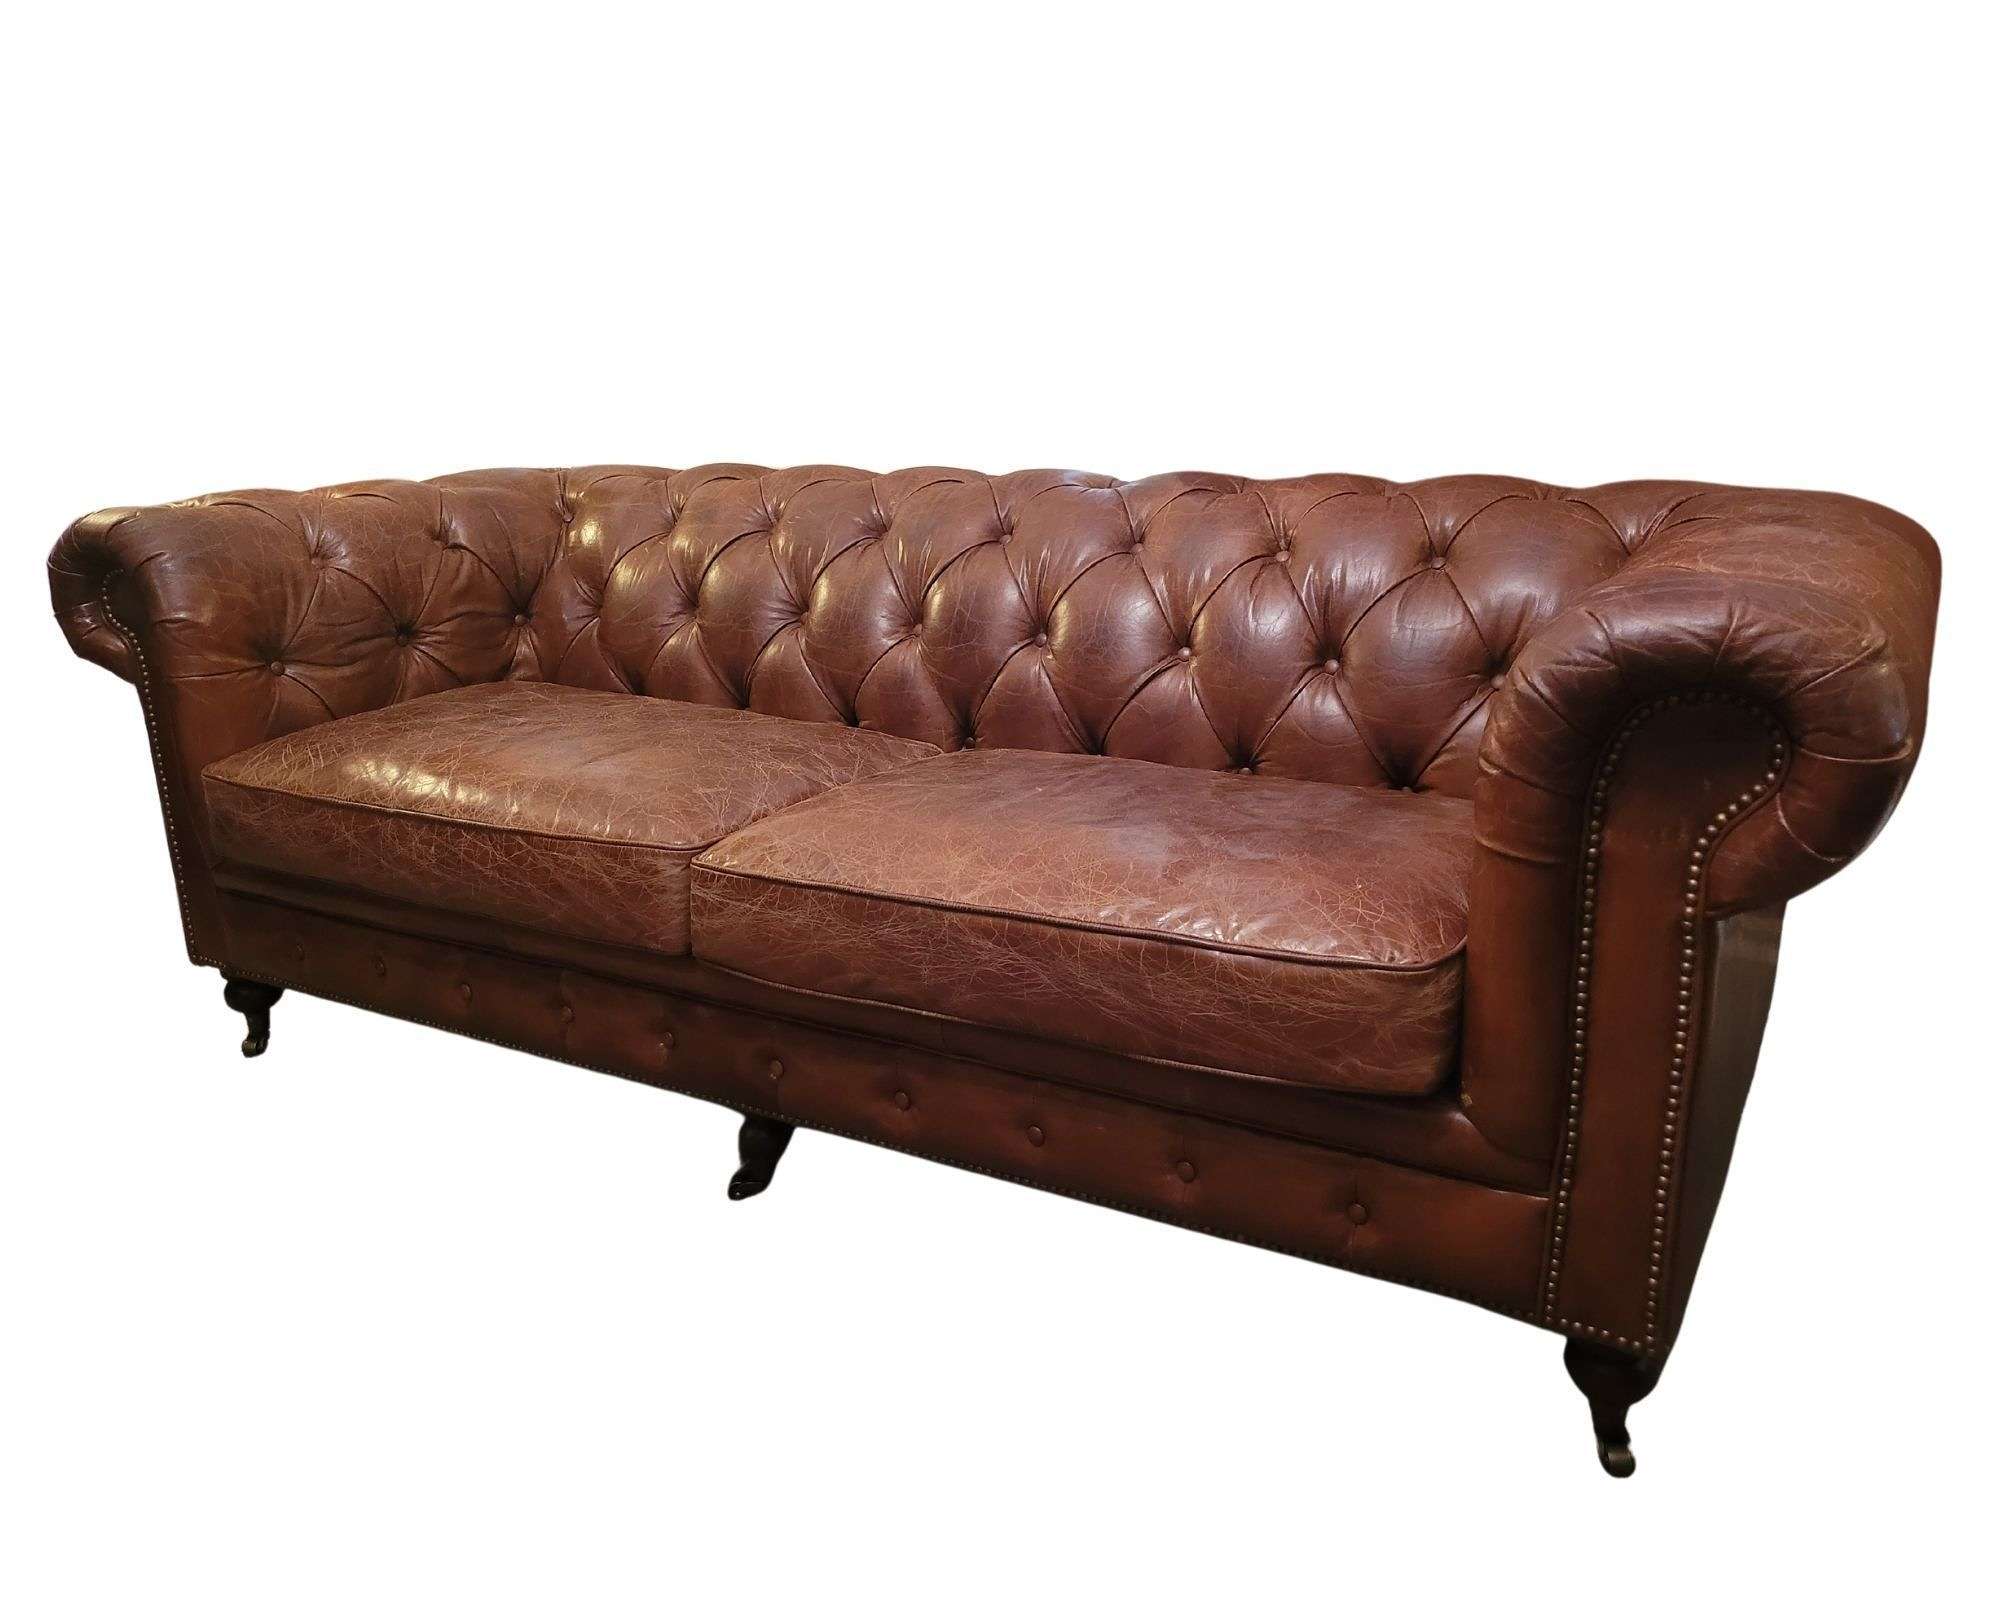 Vintage Style Leather Chesterfield Sofa